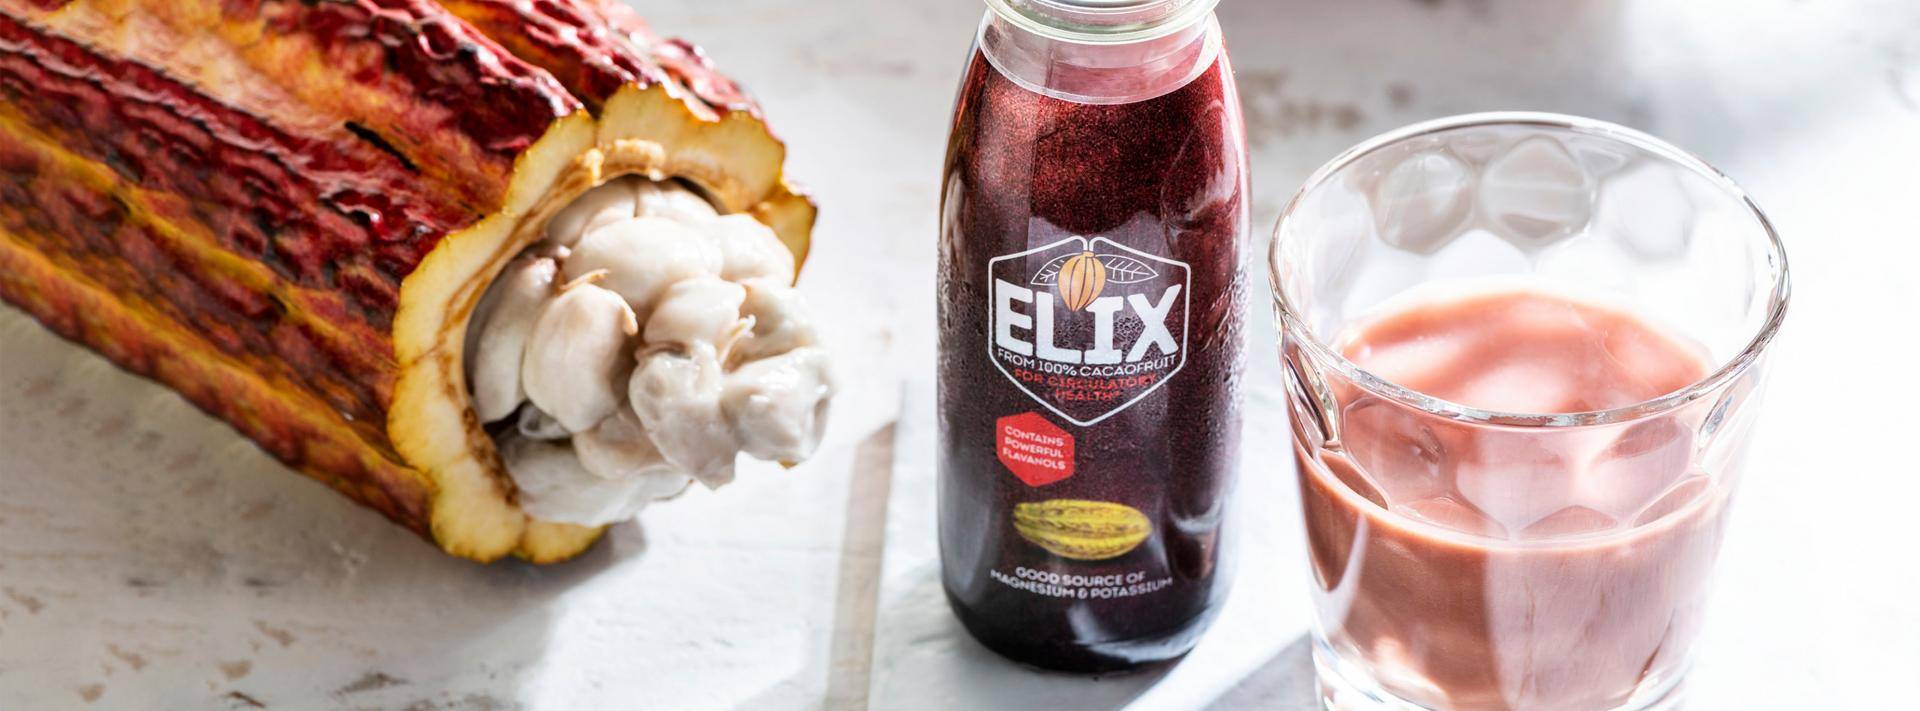 Elix drink with cacaofruit